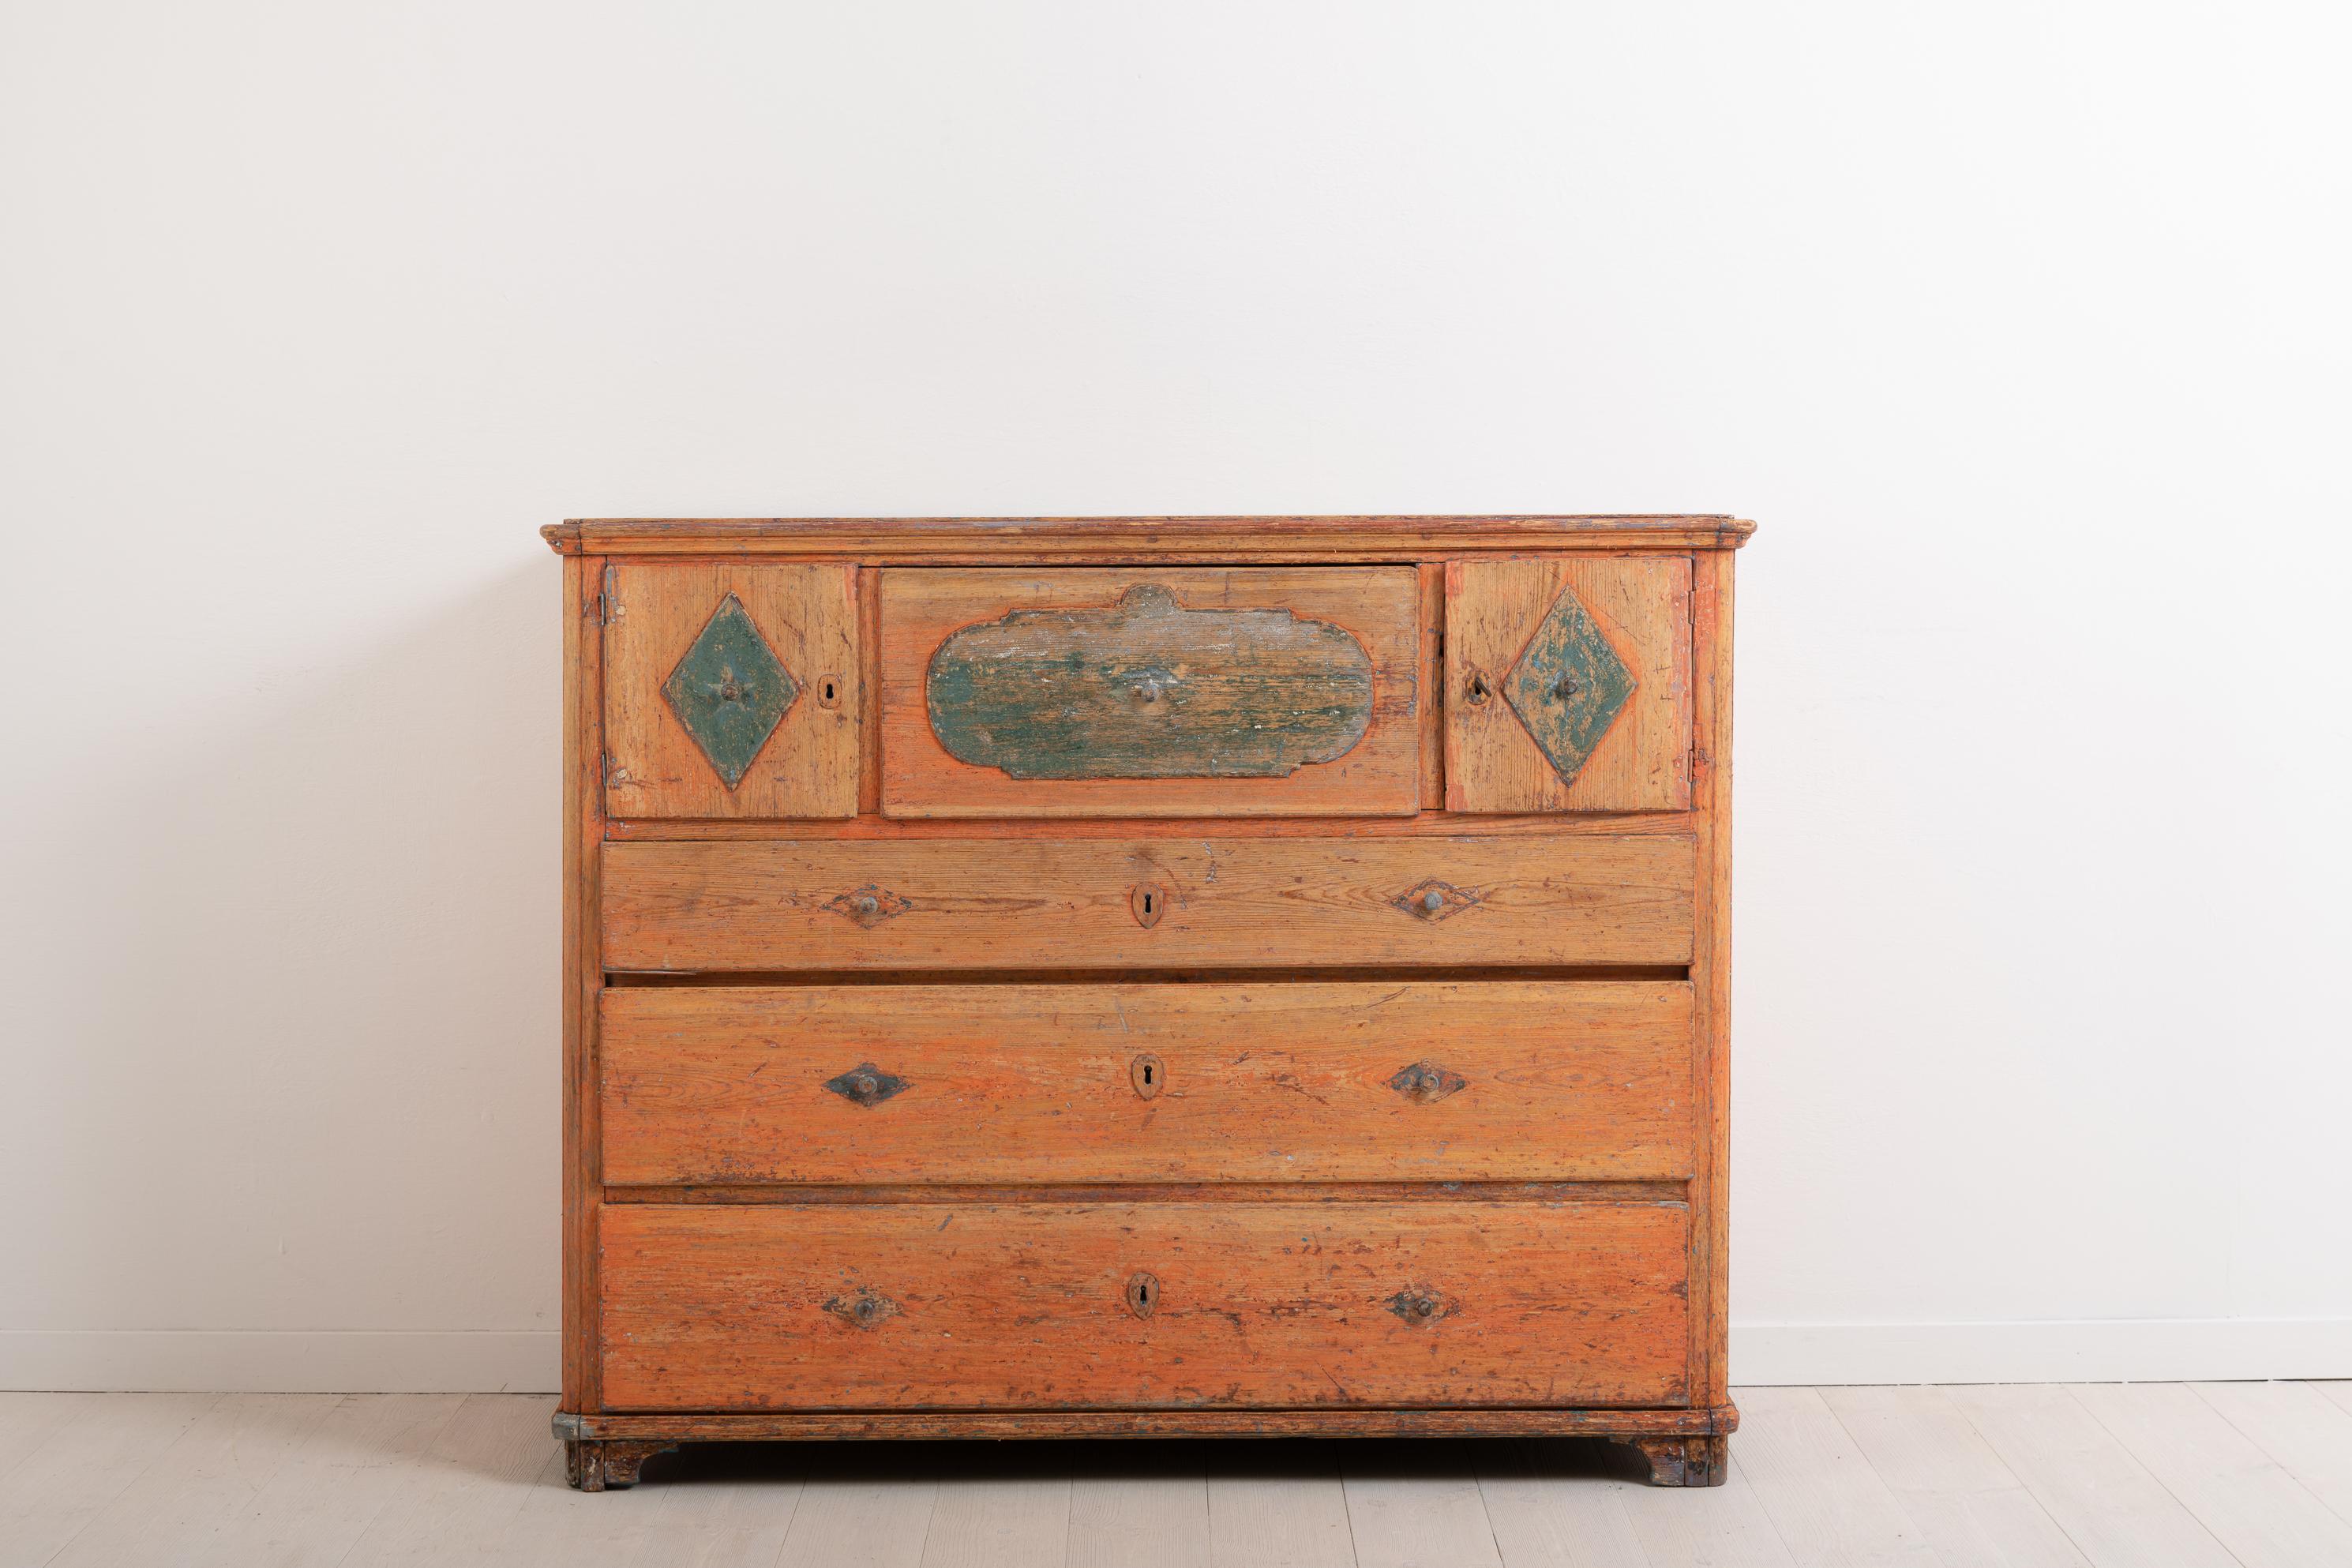 Swedish chest of drawers from the folk art period. This chest is from the early 19th century and has the original paint from the same time. While primitive it has some interesting details such as the doors on either side of the topmost drawer. All